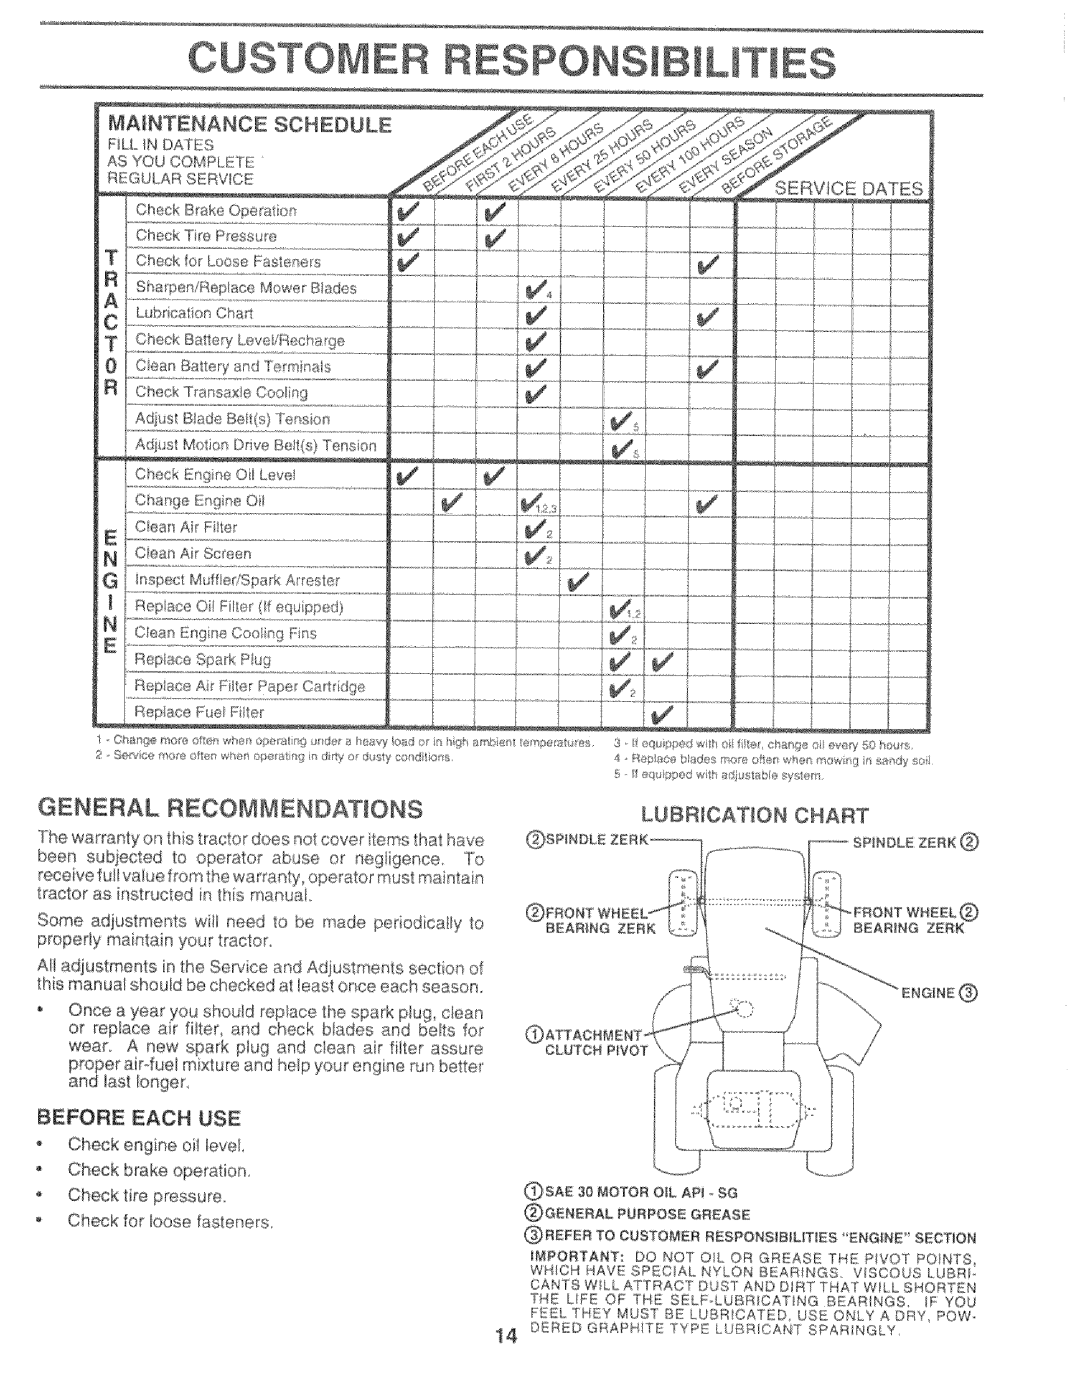 Sears 917.25759 manual General Recommendations, Lubricat_On Chart, Before Each Use 